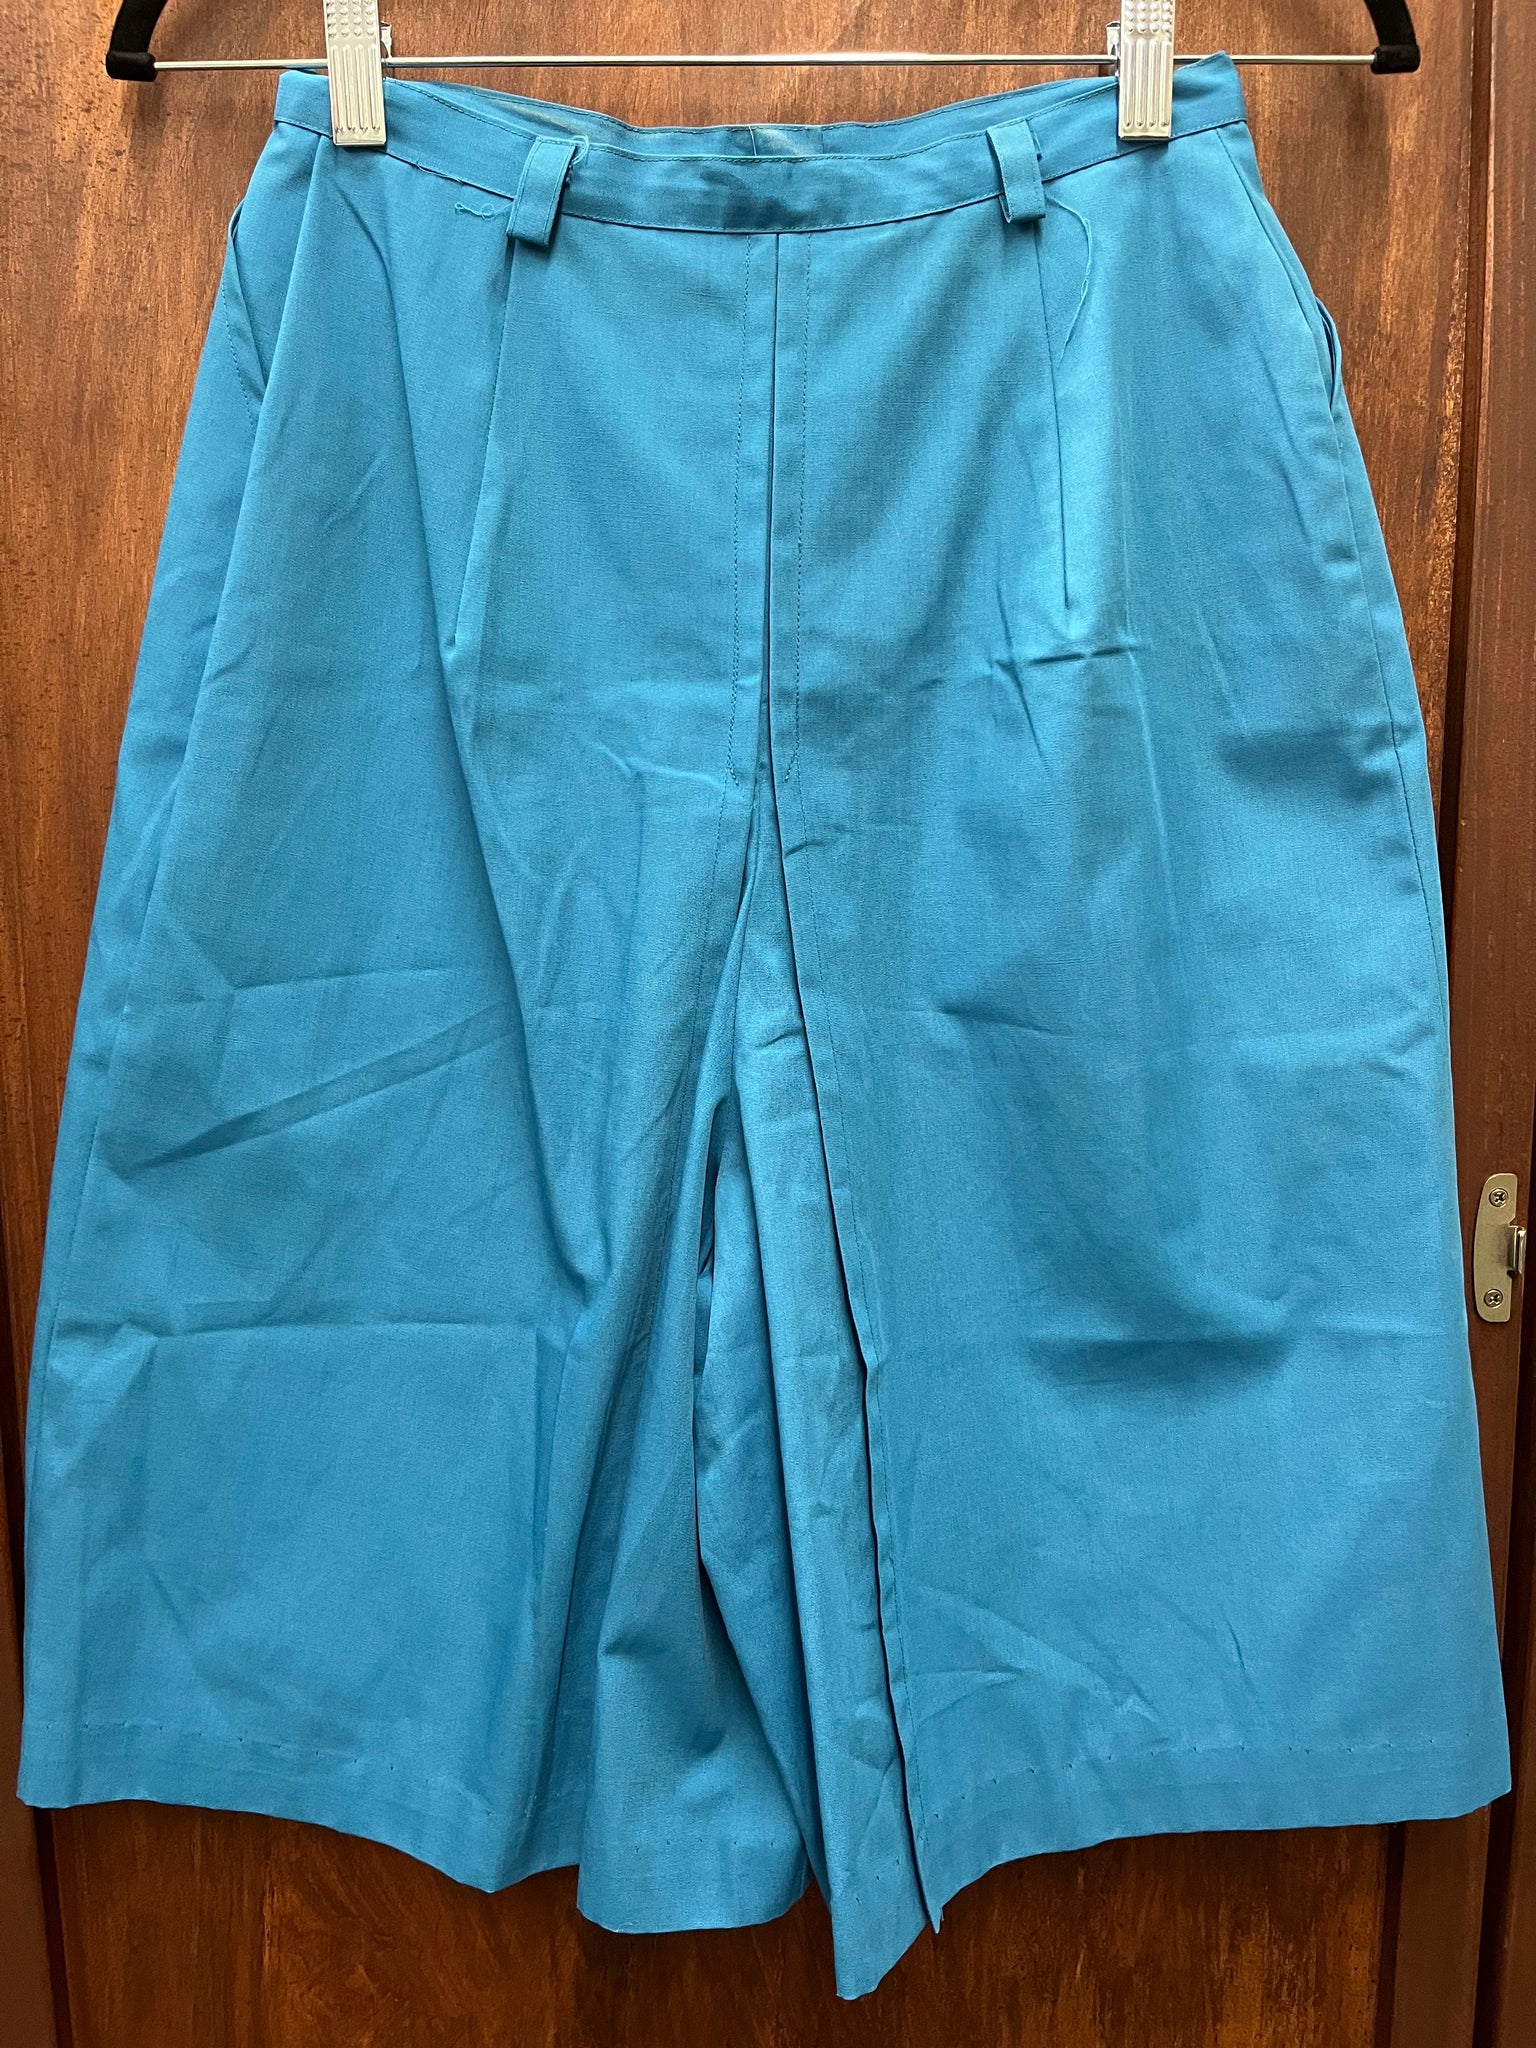 1960S SHORTS- culottes blue with belt loops